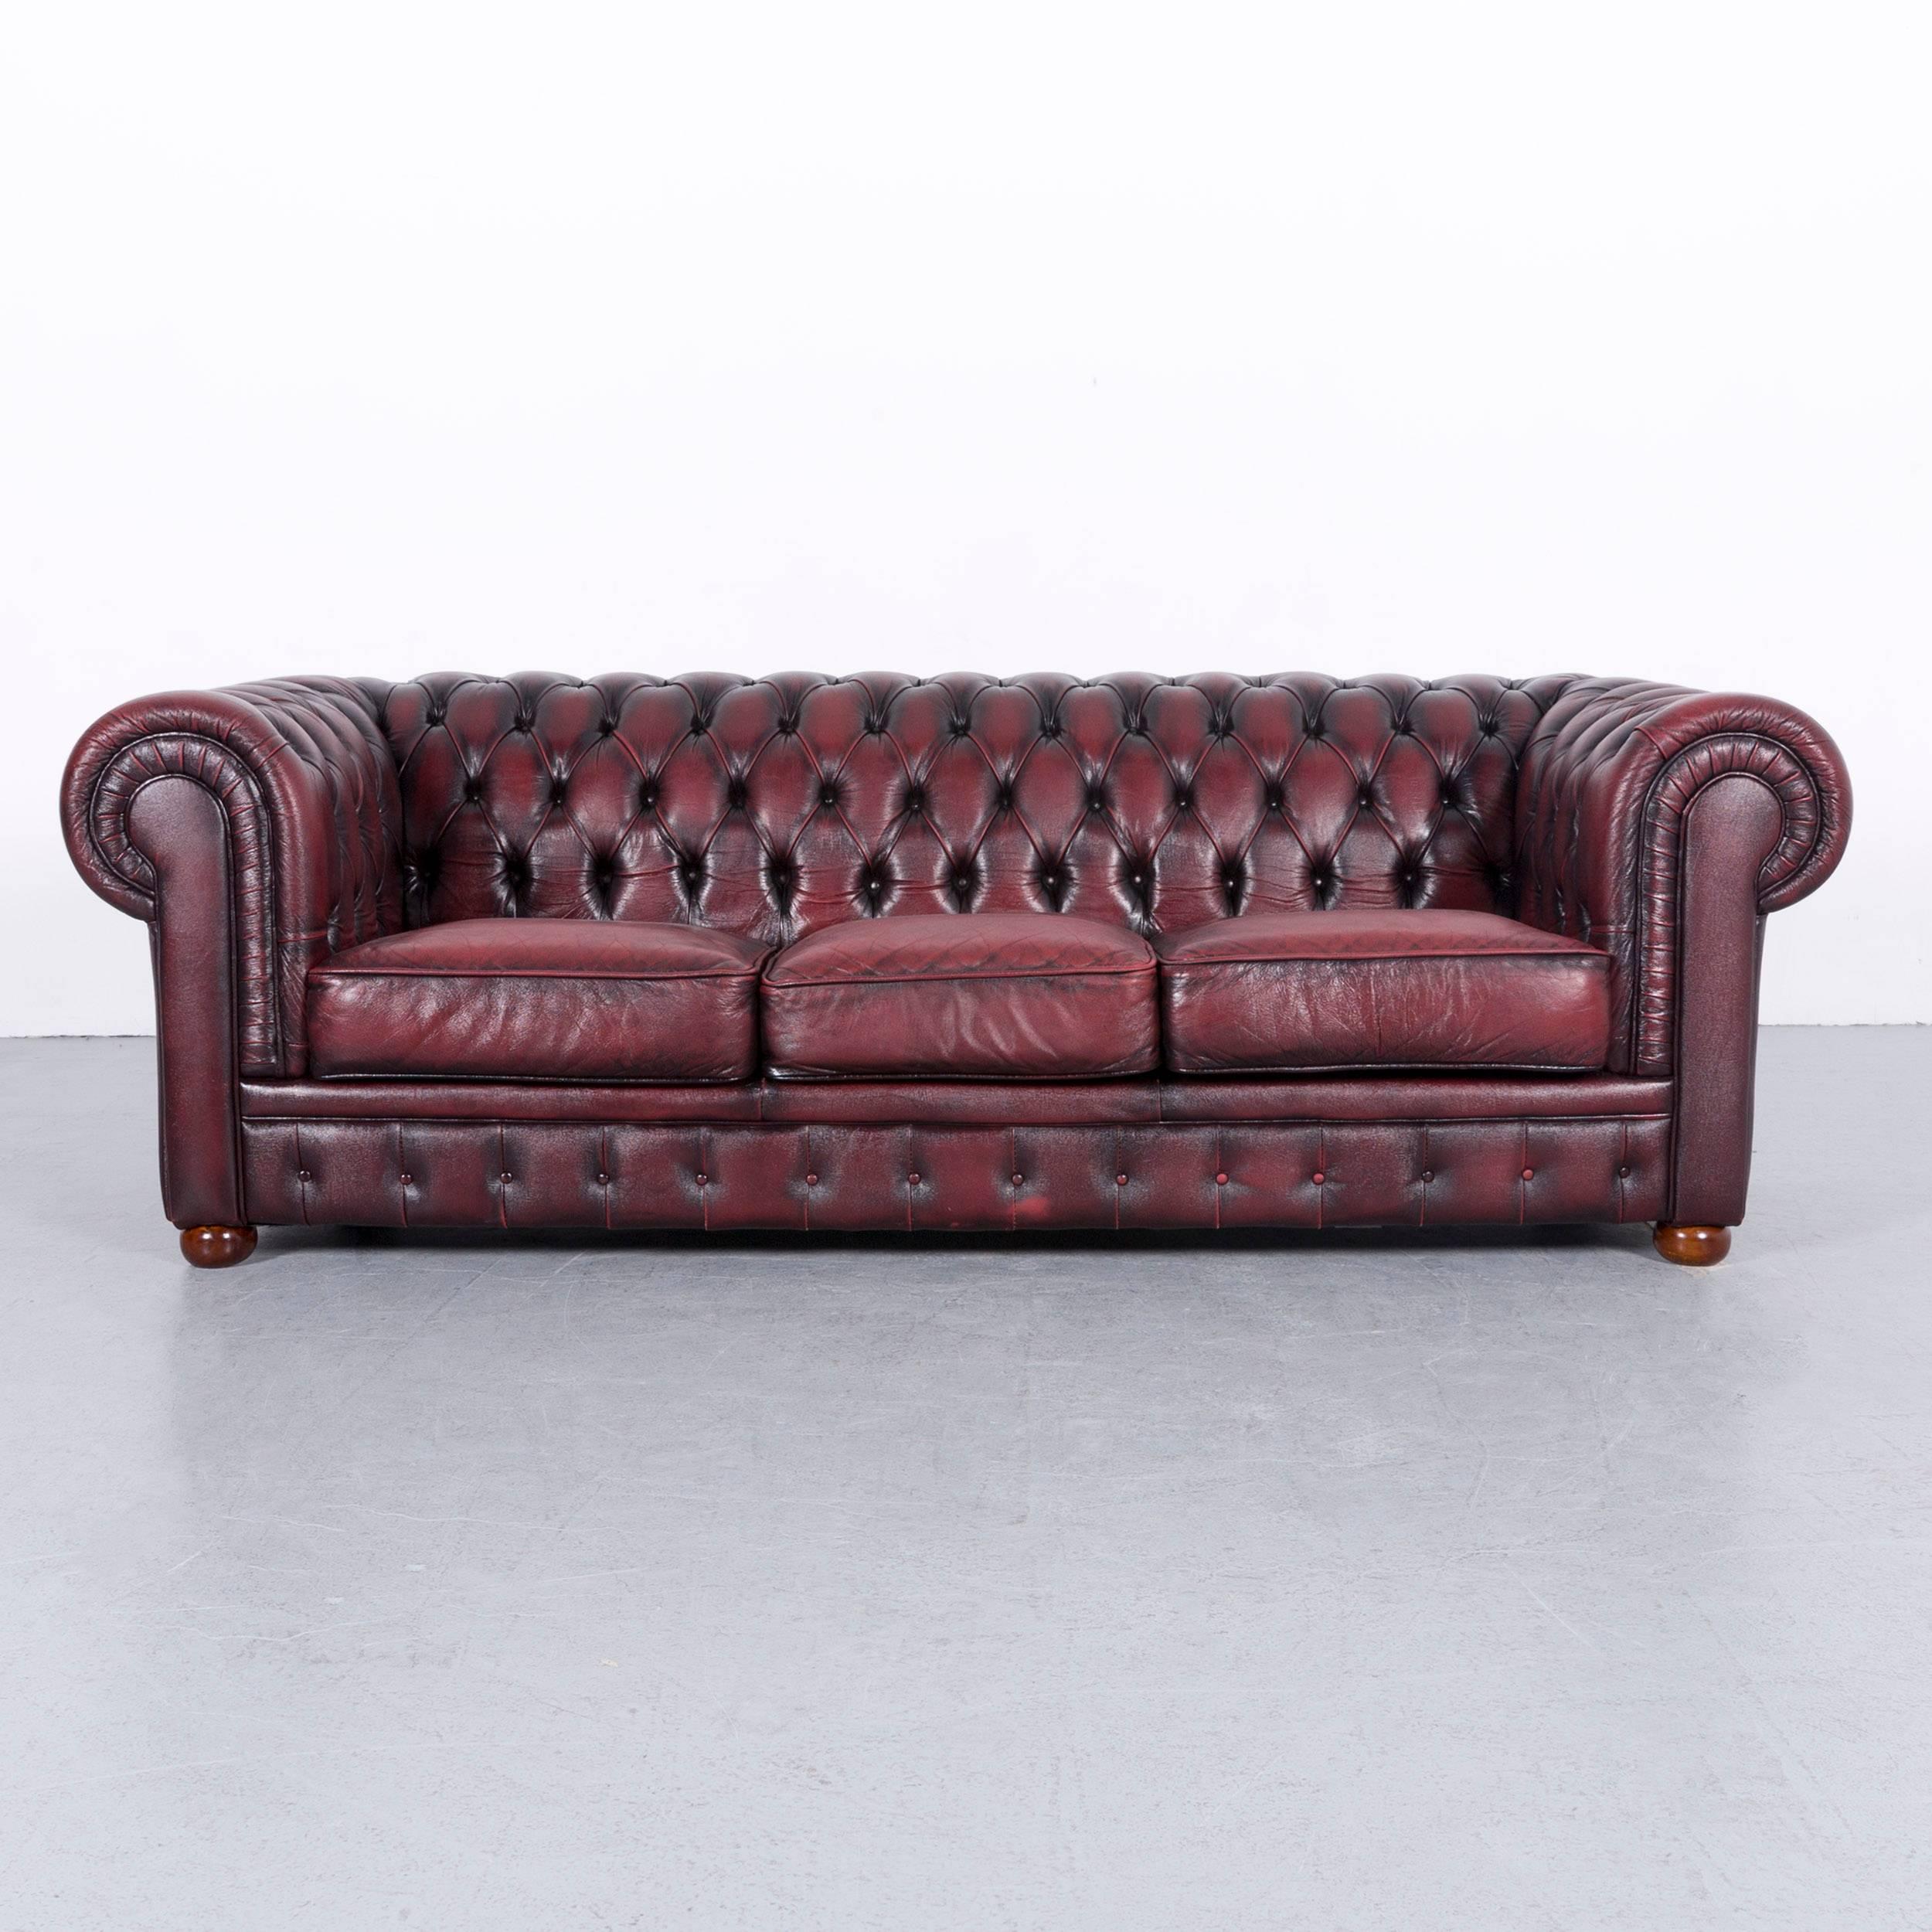 We bring to you an Chesterfield leather sofa set red three-seat two-seat.






























        